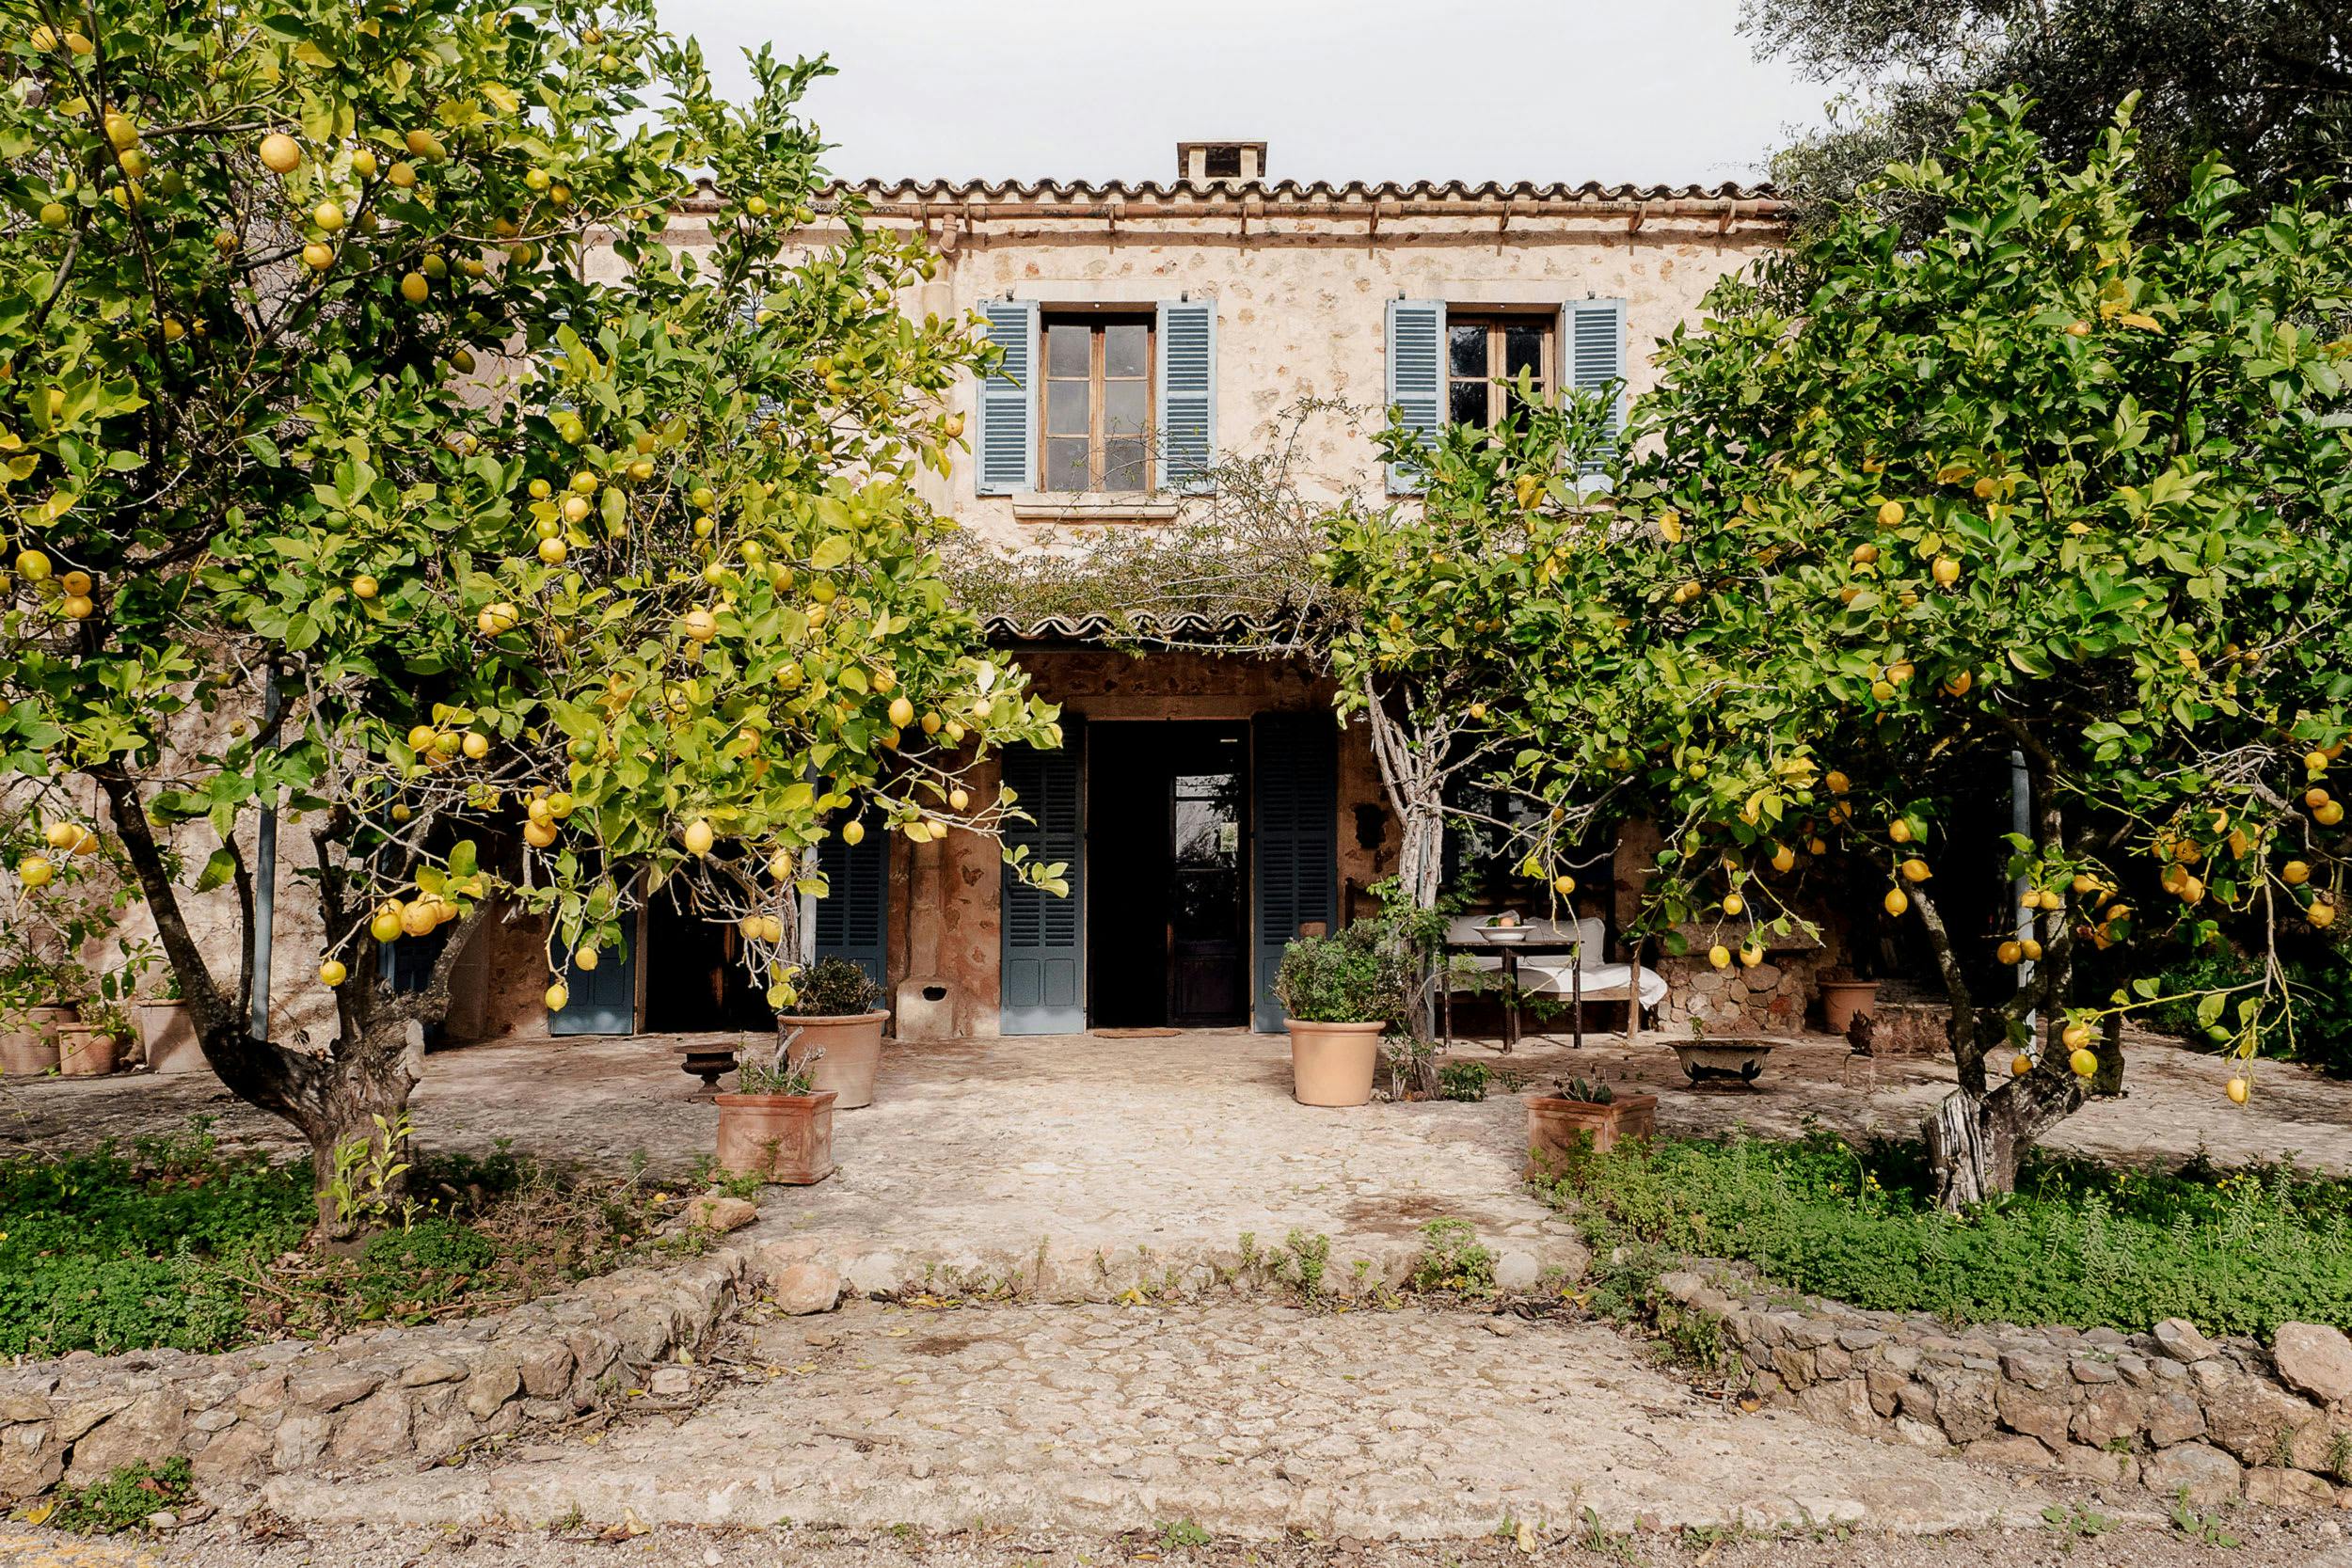 The image features a large, old building with a stone facade, surrounded by a courtyard filled with oranges.